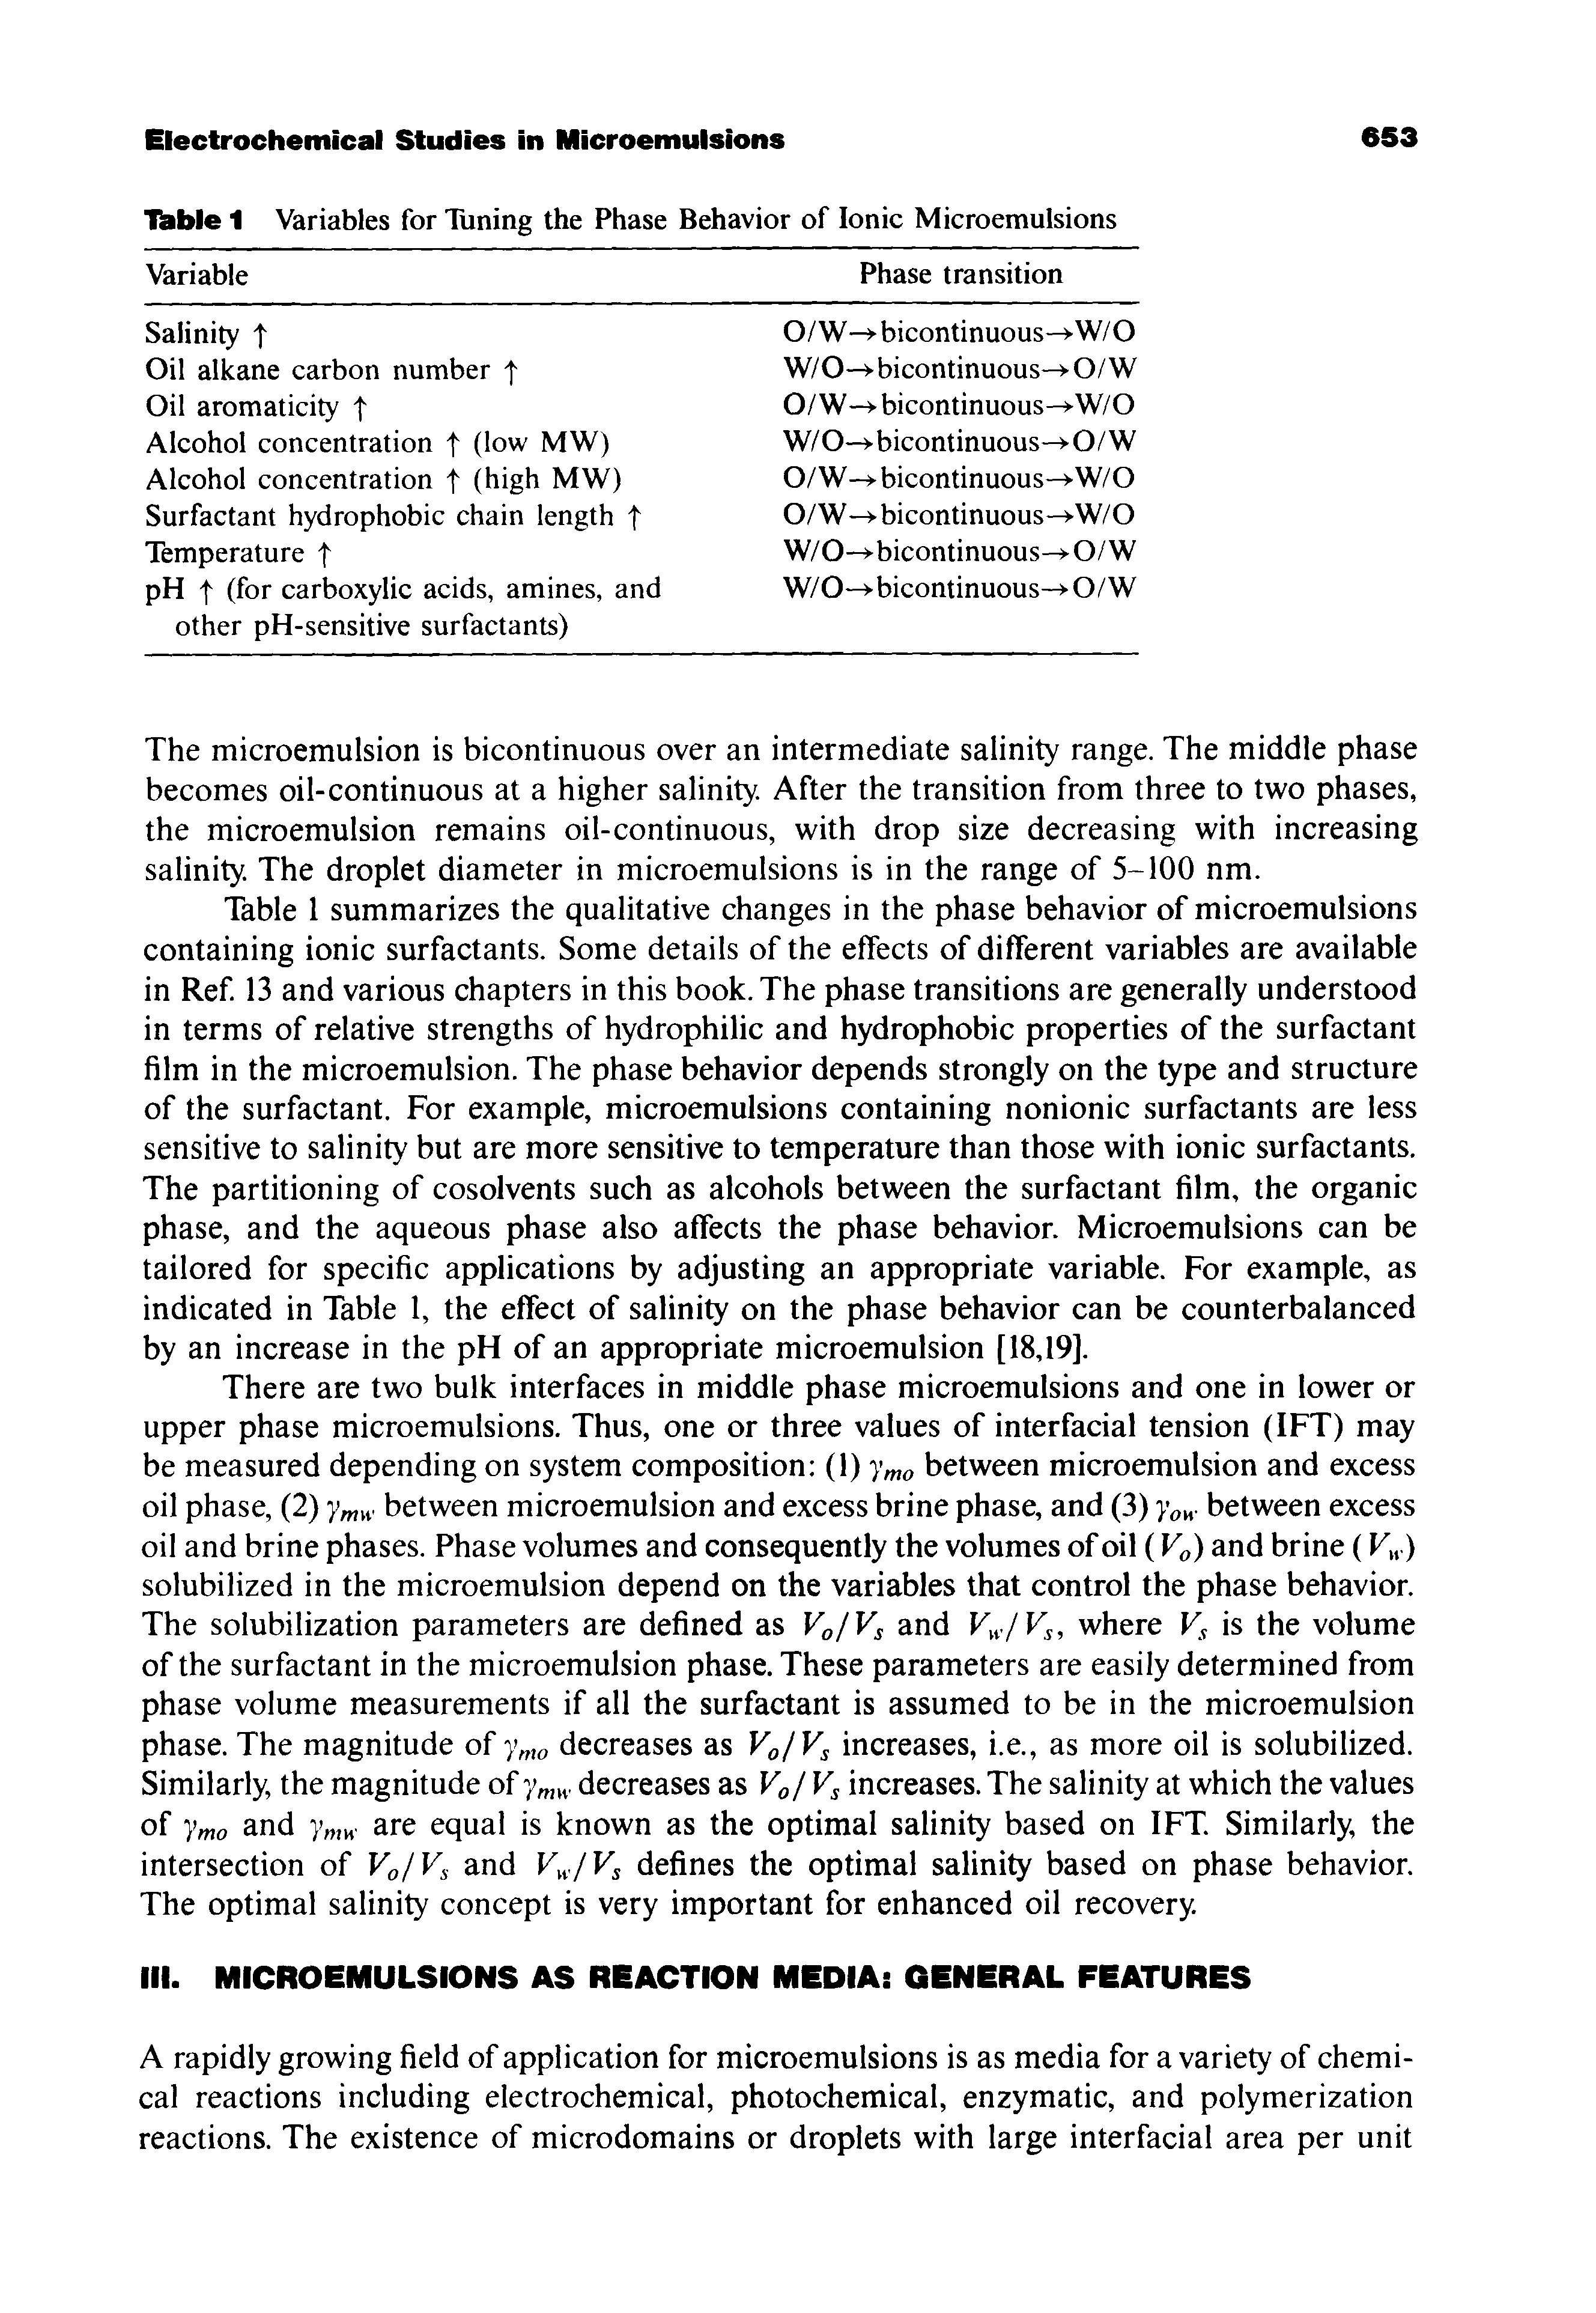 Table I summarizes the qualitative changes in the phase behavior of microemulsions containing ionic surfactants. Some details of the effects of different variables are available in Ref. 13 and various chapters in this book. The phase transitions are generally understood in terms of relative strengths of hydrophilic and hydrophobic properties of the surfactant film in the microemulsion. The phase behavior depends strongly on the type and structure of the surfactant. For example, microemulsions containing nonionic surfactants are less sensitive to salinity but are more sensitive to temperature than those with ionic surfactants. The partitioning of cosolvents such as alcohols between the surfactant film, the organic phase, and the aqueous phase also affects the phase behavior. Microemulsions can be tailored for specific applications by adjusting an appropriate variable. For example, as indicated in Table 1, the effect of salinity on the phase behavior can be counterbalanced by an increase in the pH of an appropriate microemulsion [18,19].